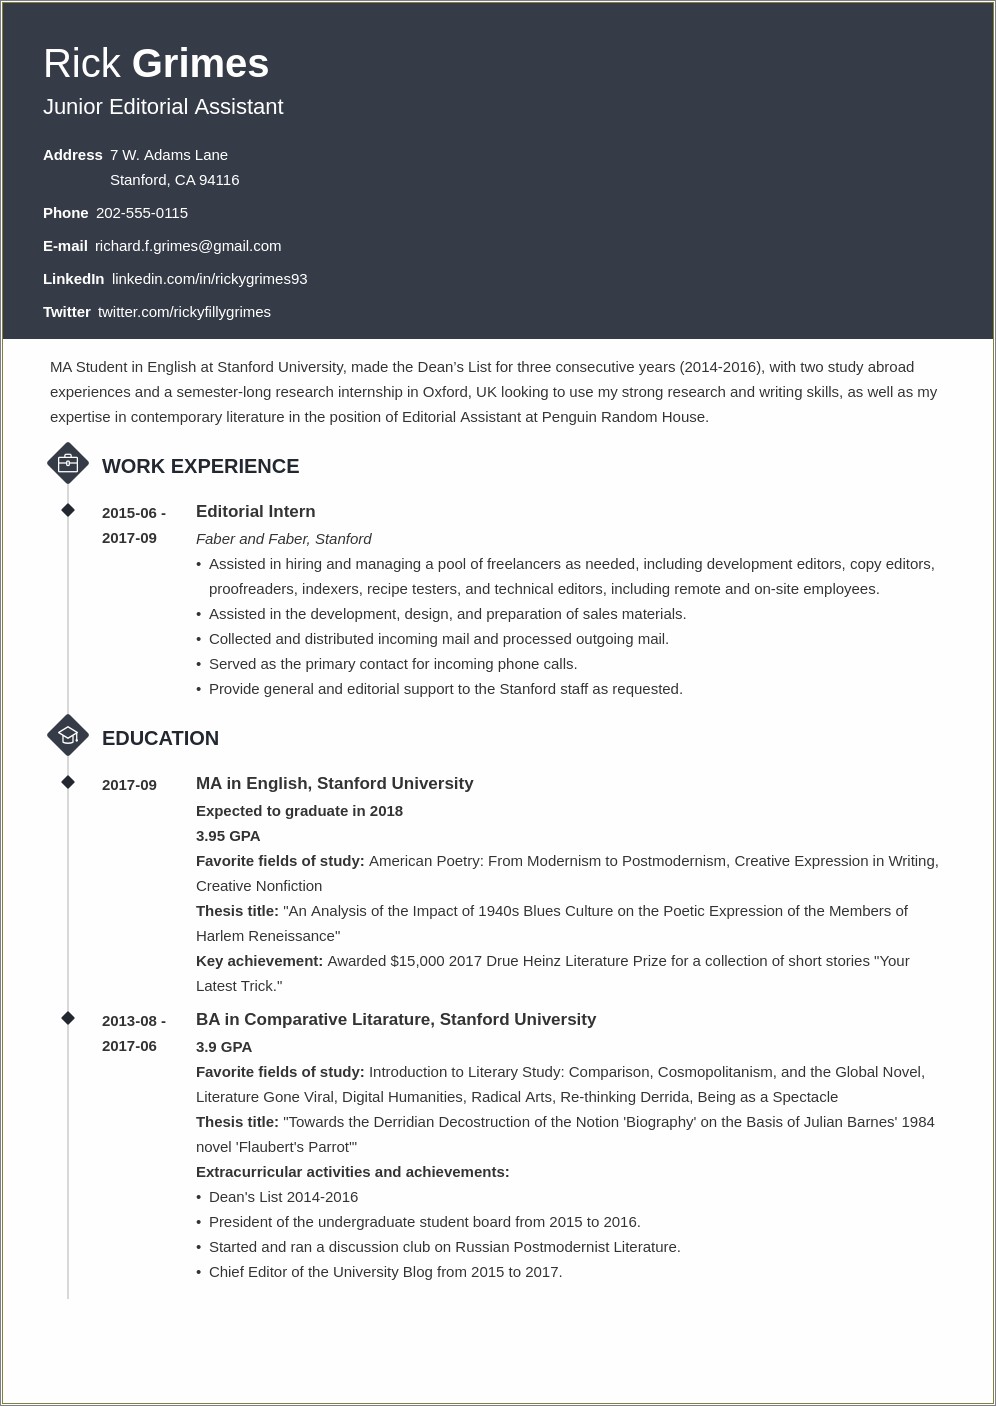 Resume Summary Expamples For Graduate Students